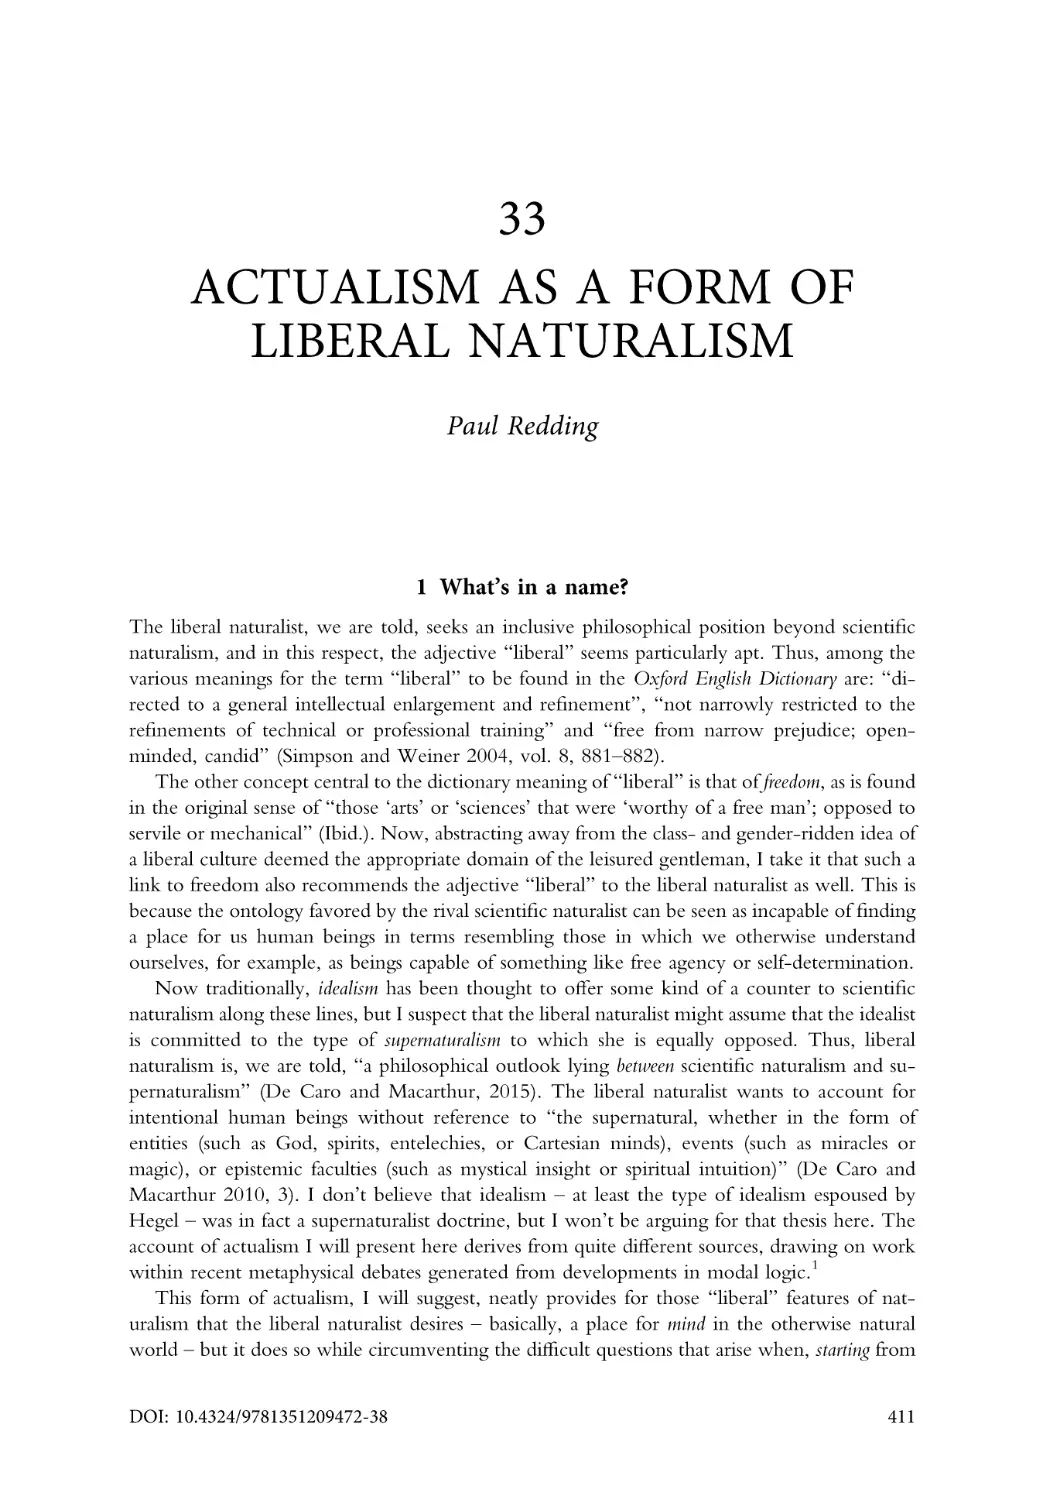 33. Actualism as a form of liberal naturalism
1. What's in a name?